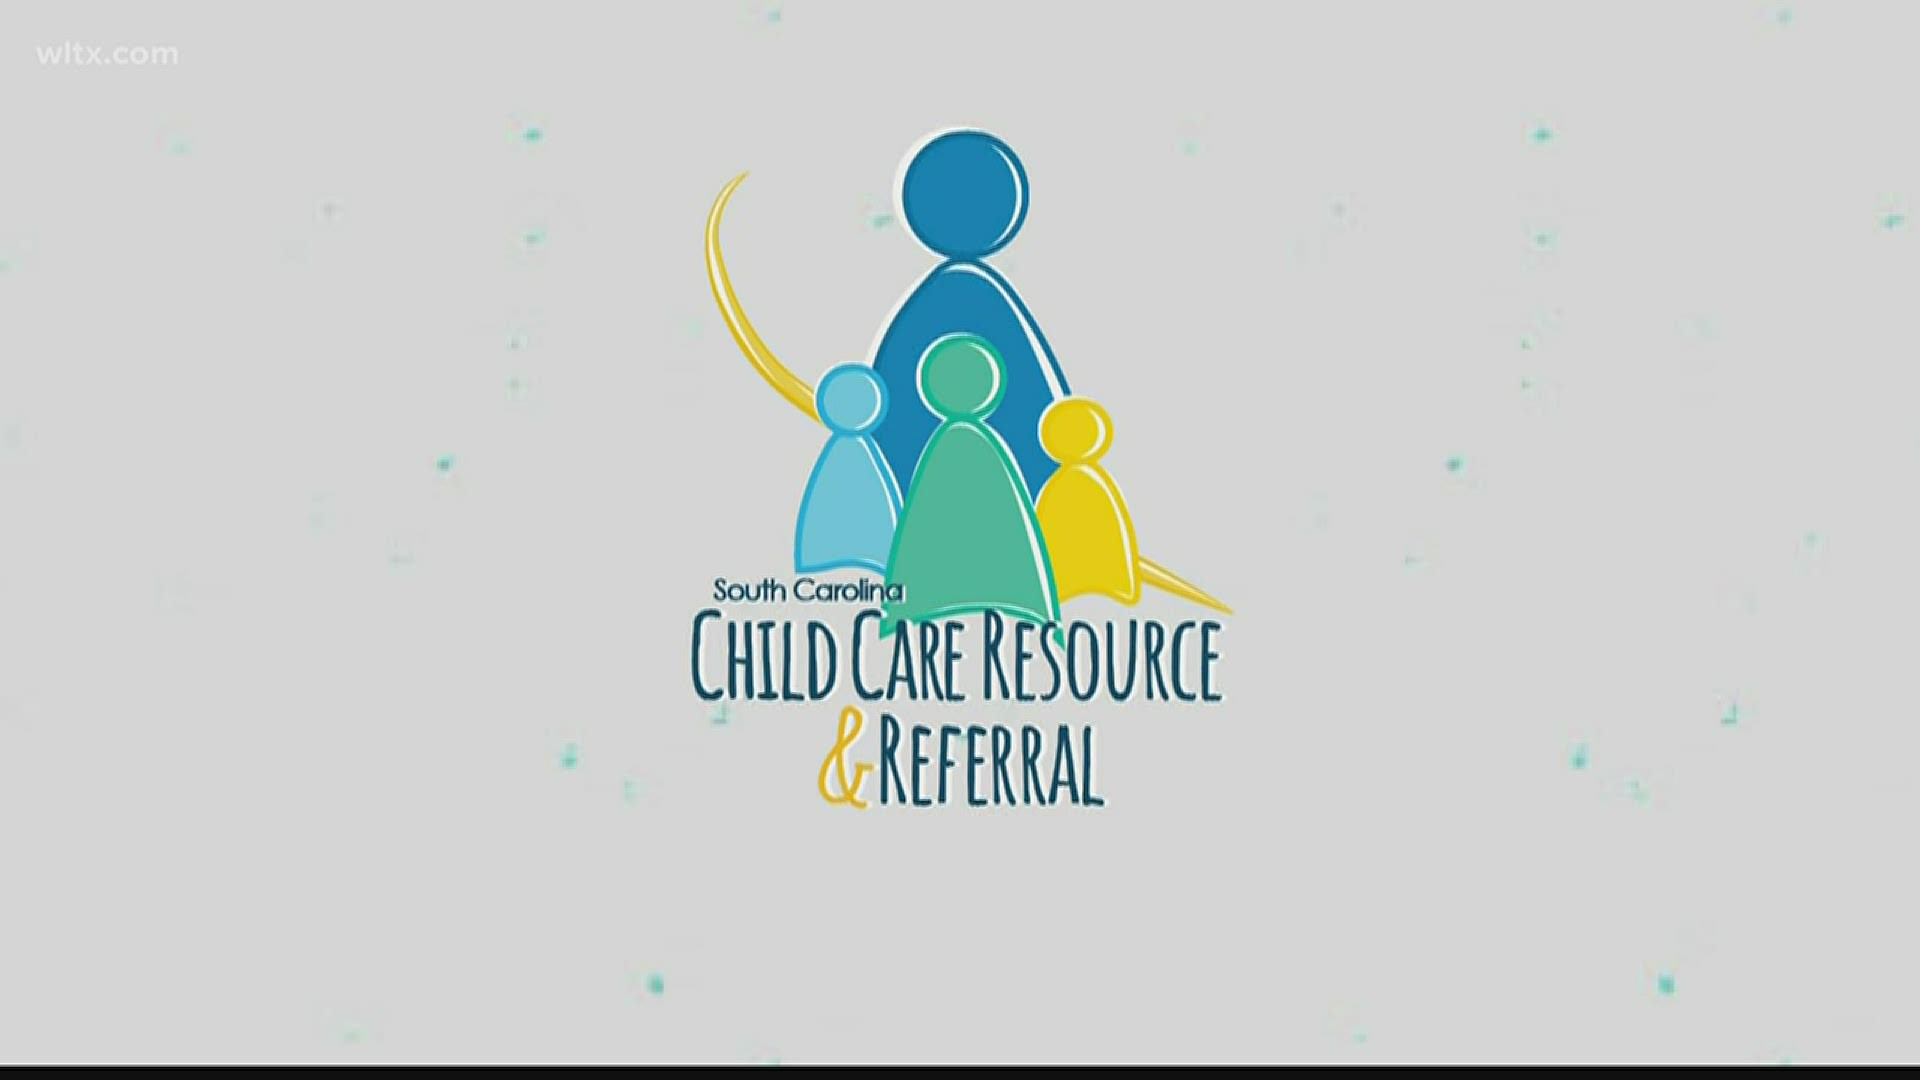 South Carolina Child Care Resource & Referral helps parents find child care that meets their family's needs.